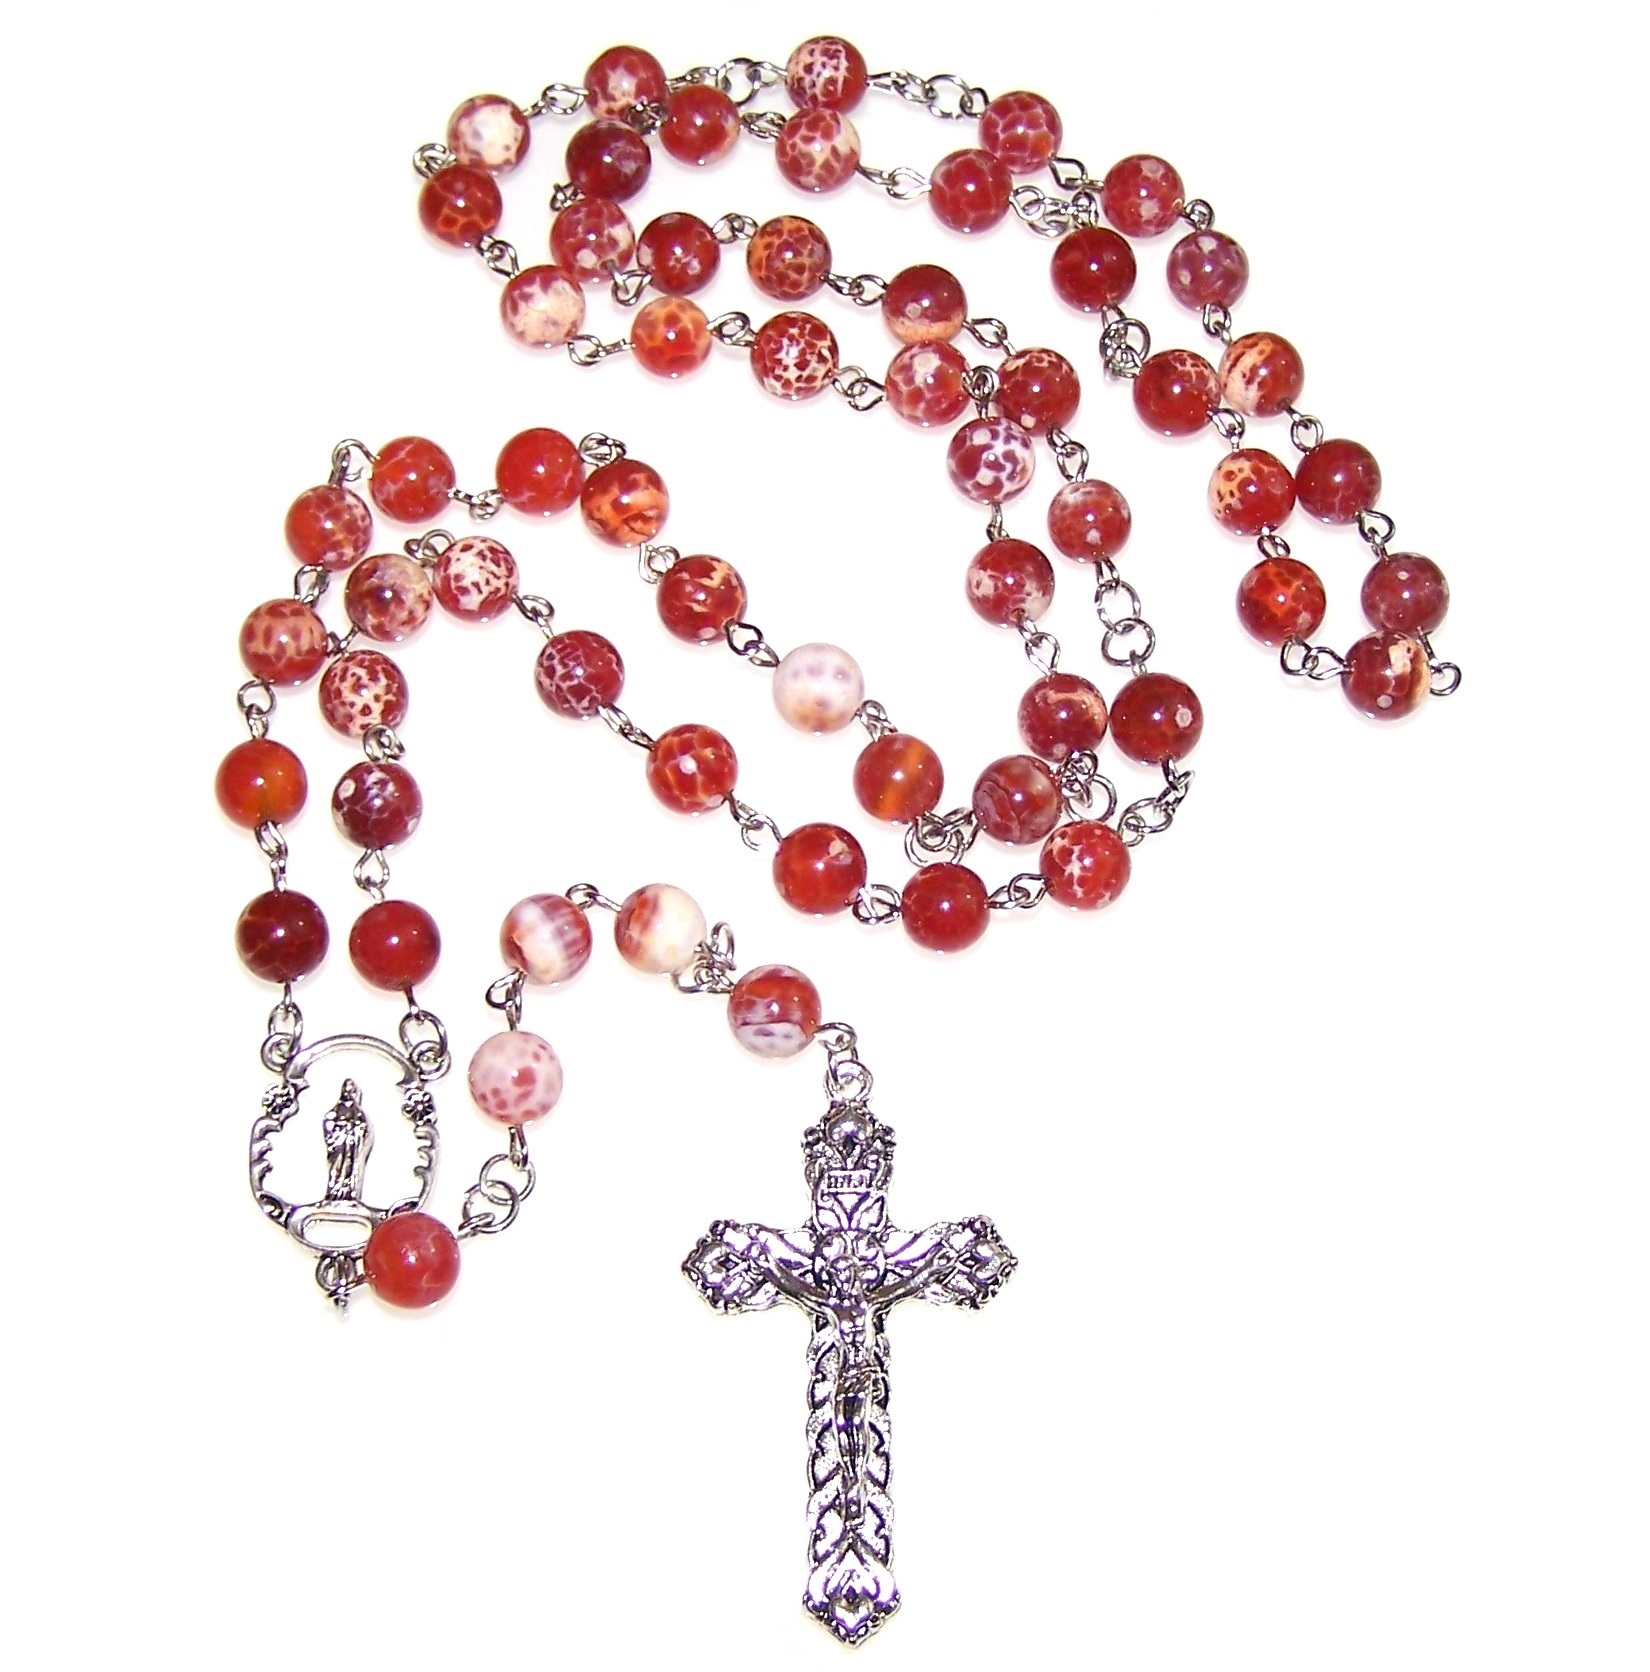 How to make your own Rosary